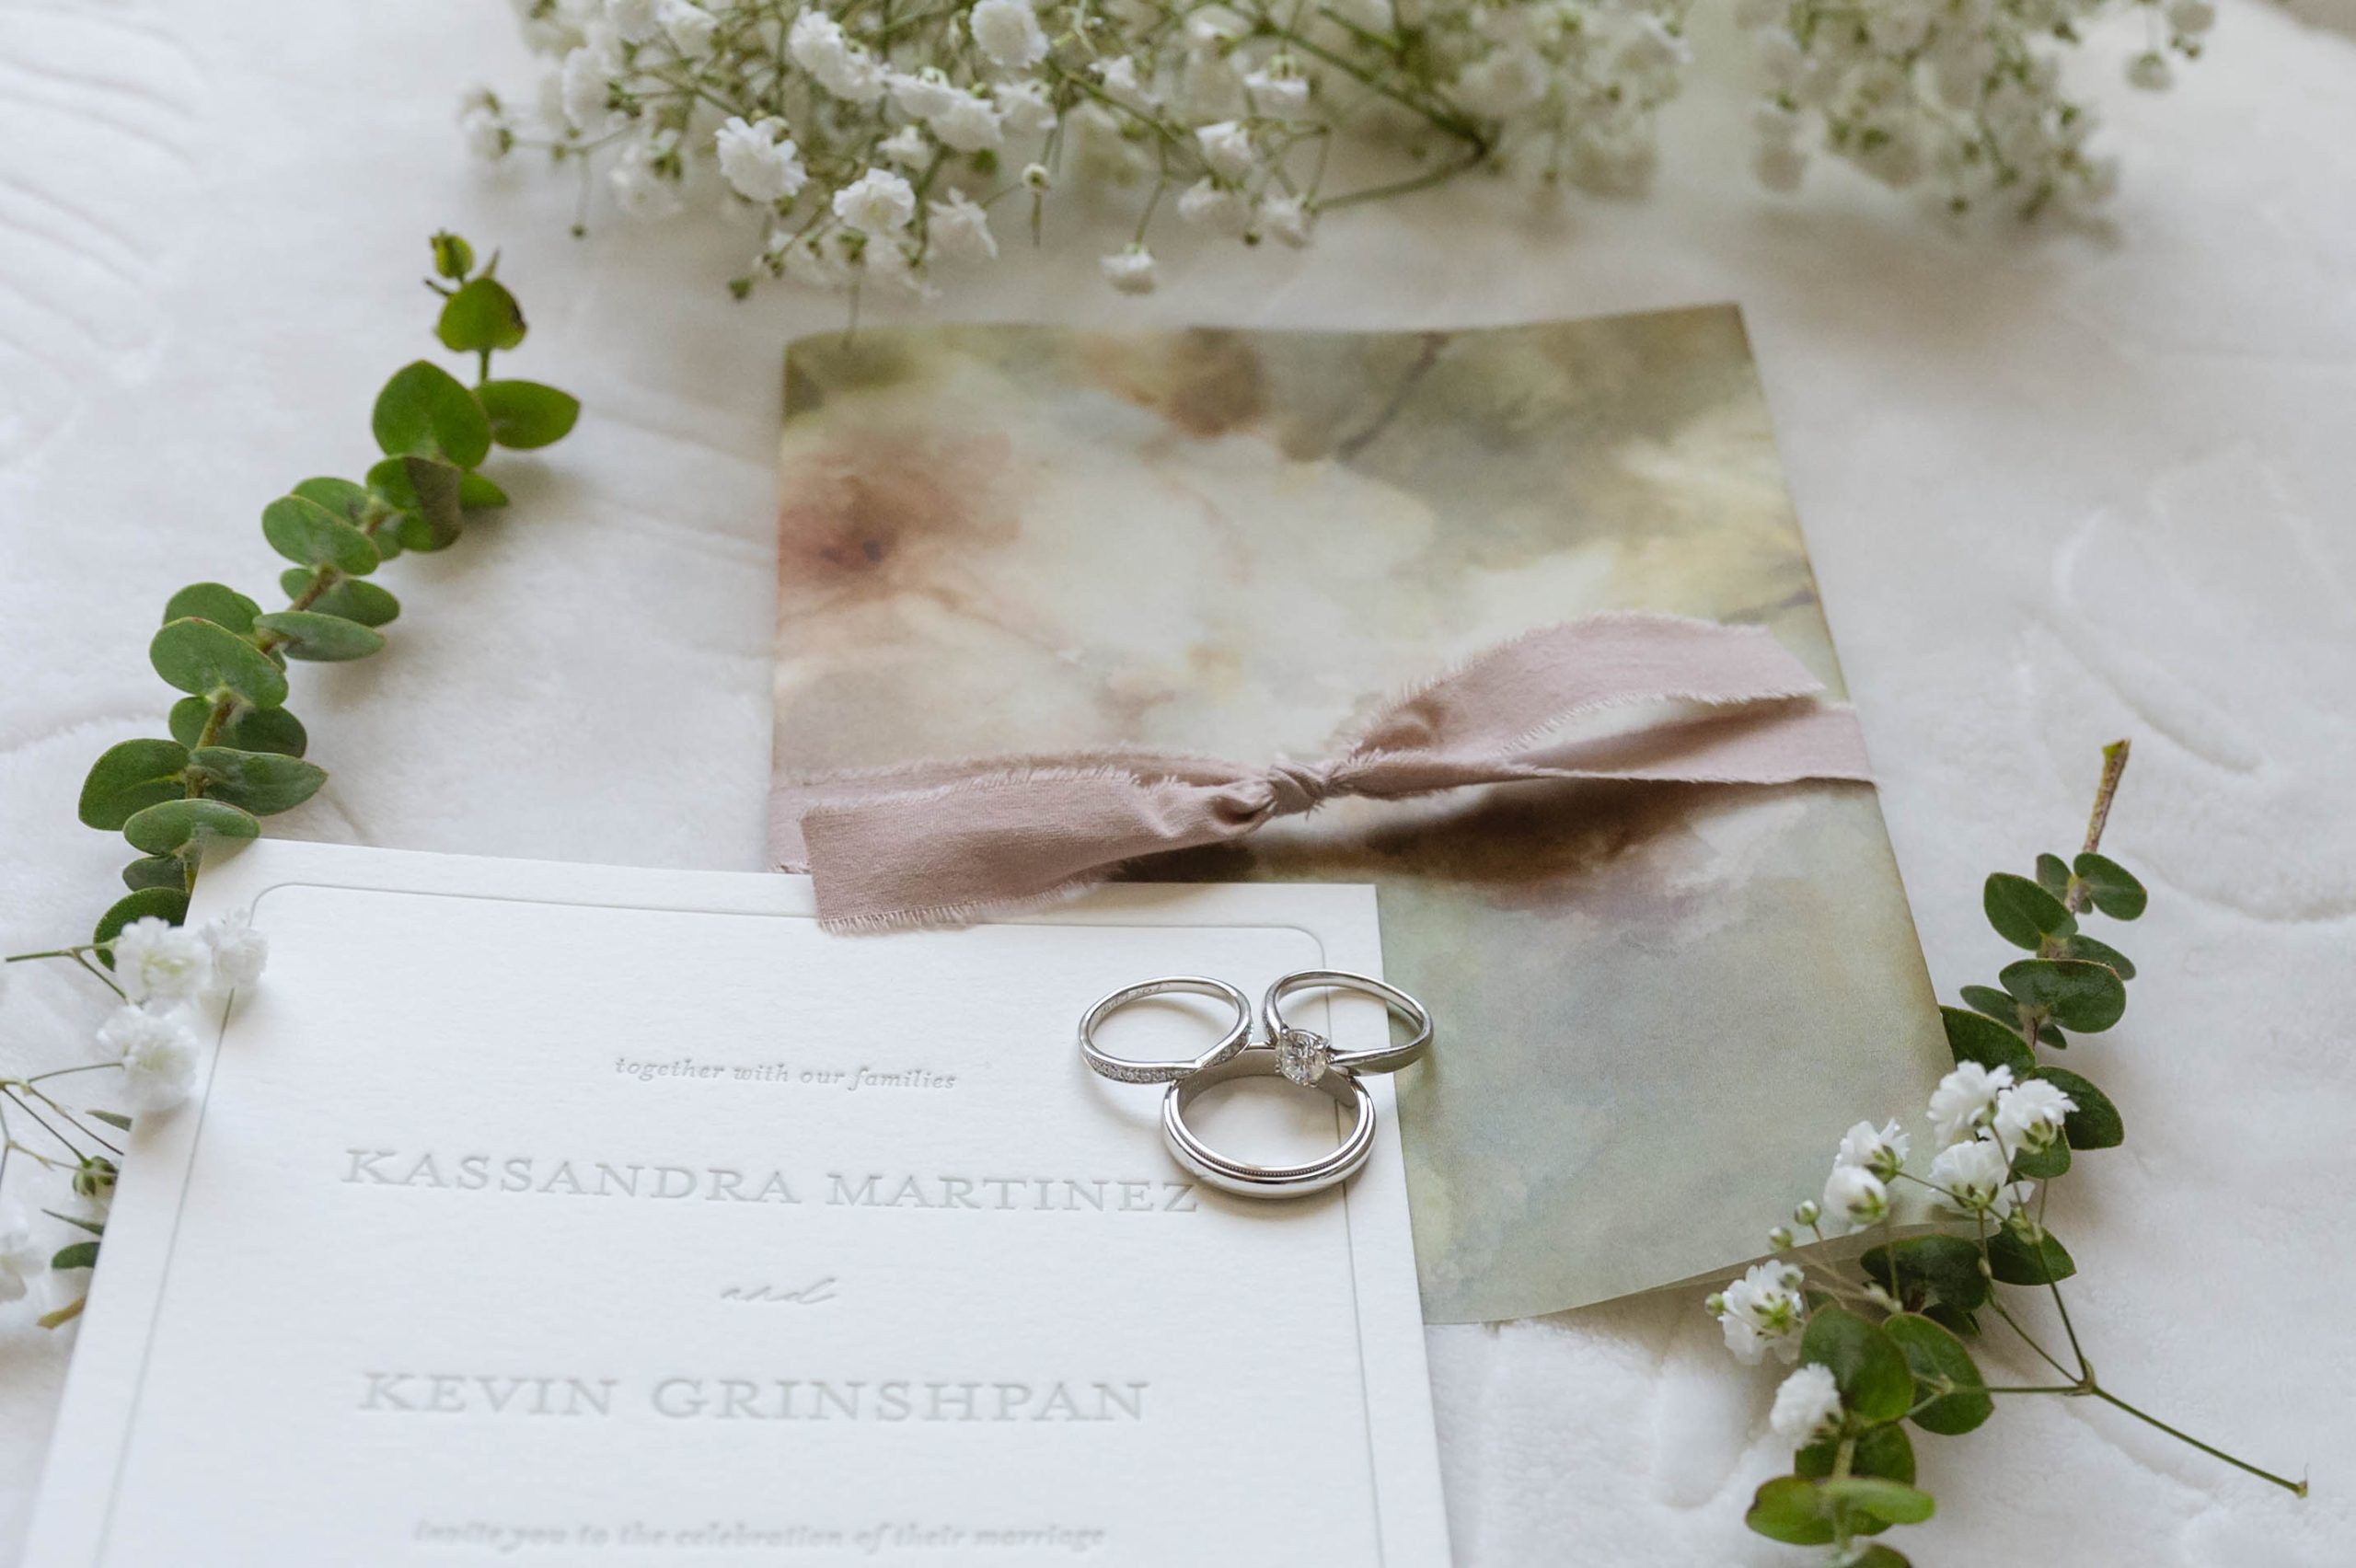 Details from this Soft Romantic + Minimalistic Wedding at Viansa Winery in Sonoma Jen Vazquez Photography